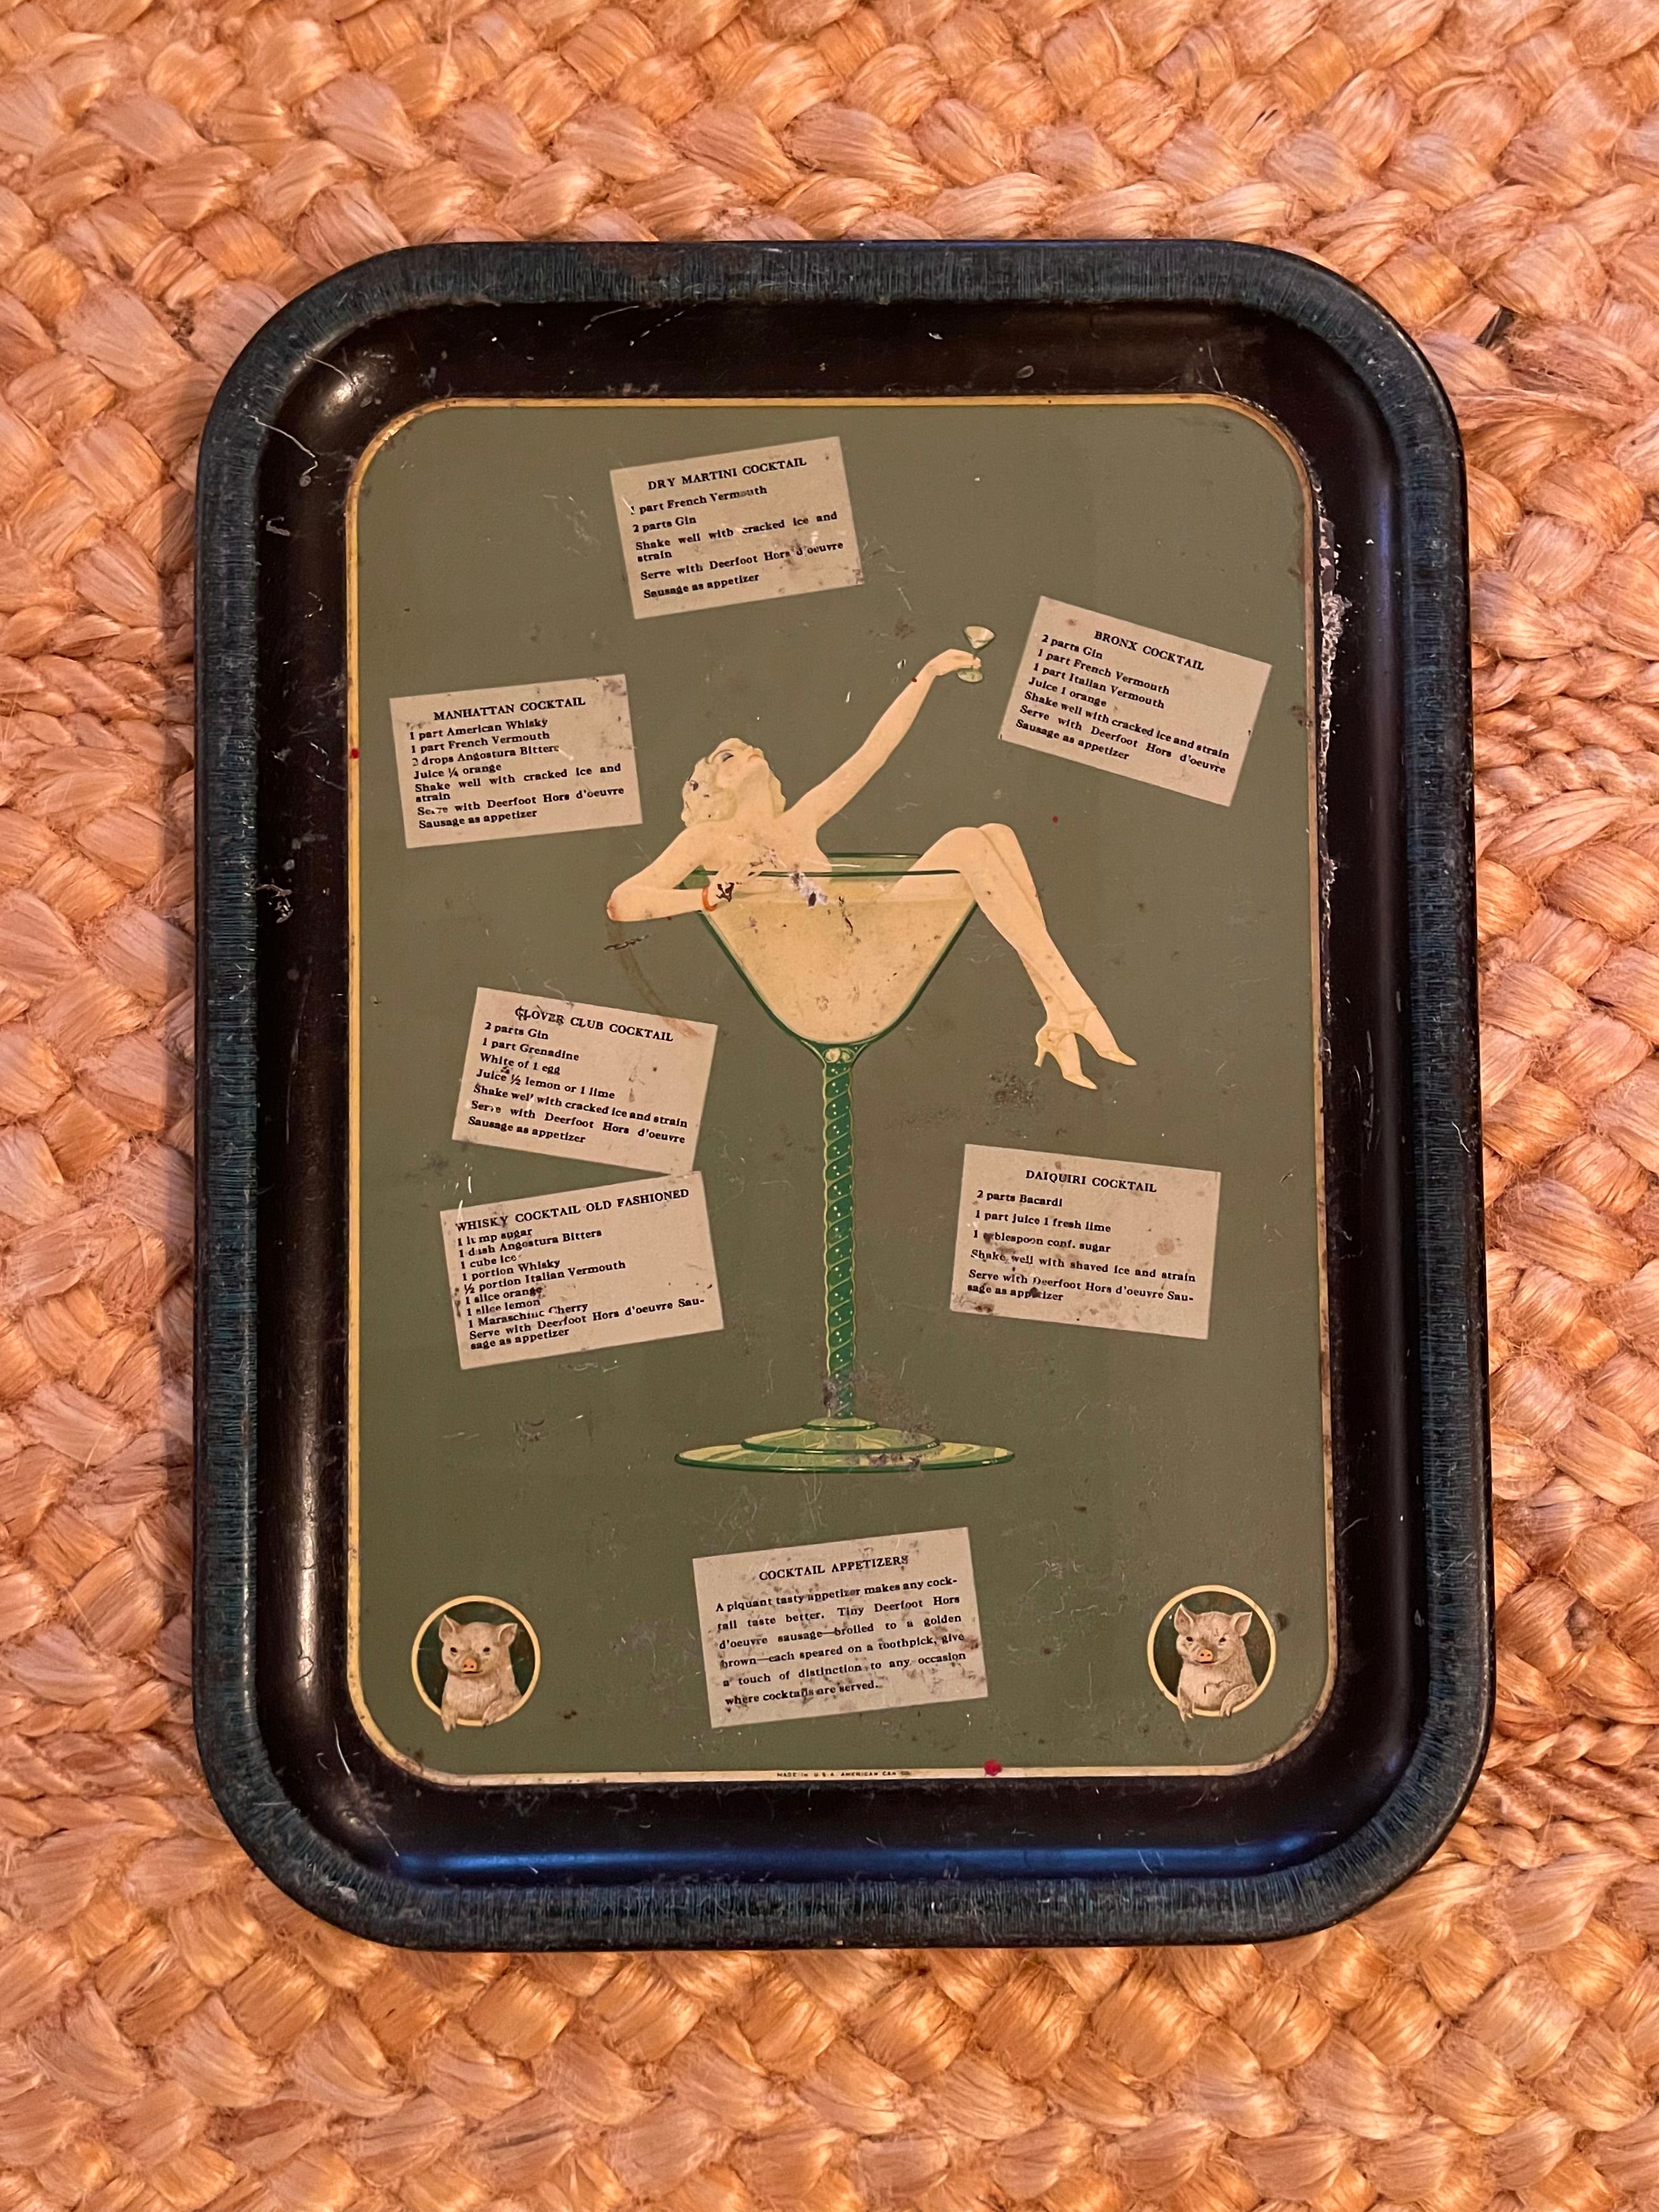 Vintage Cocktail Tray